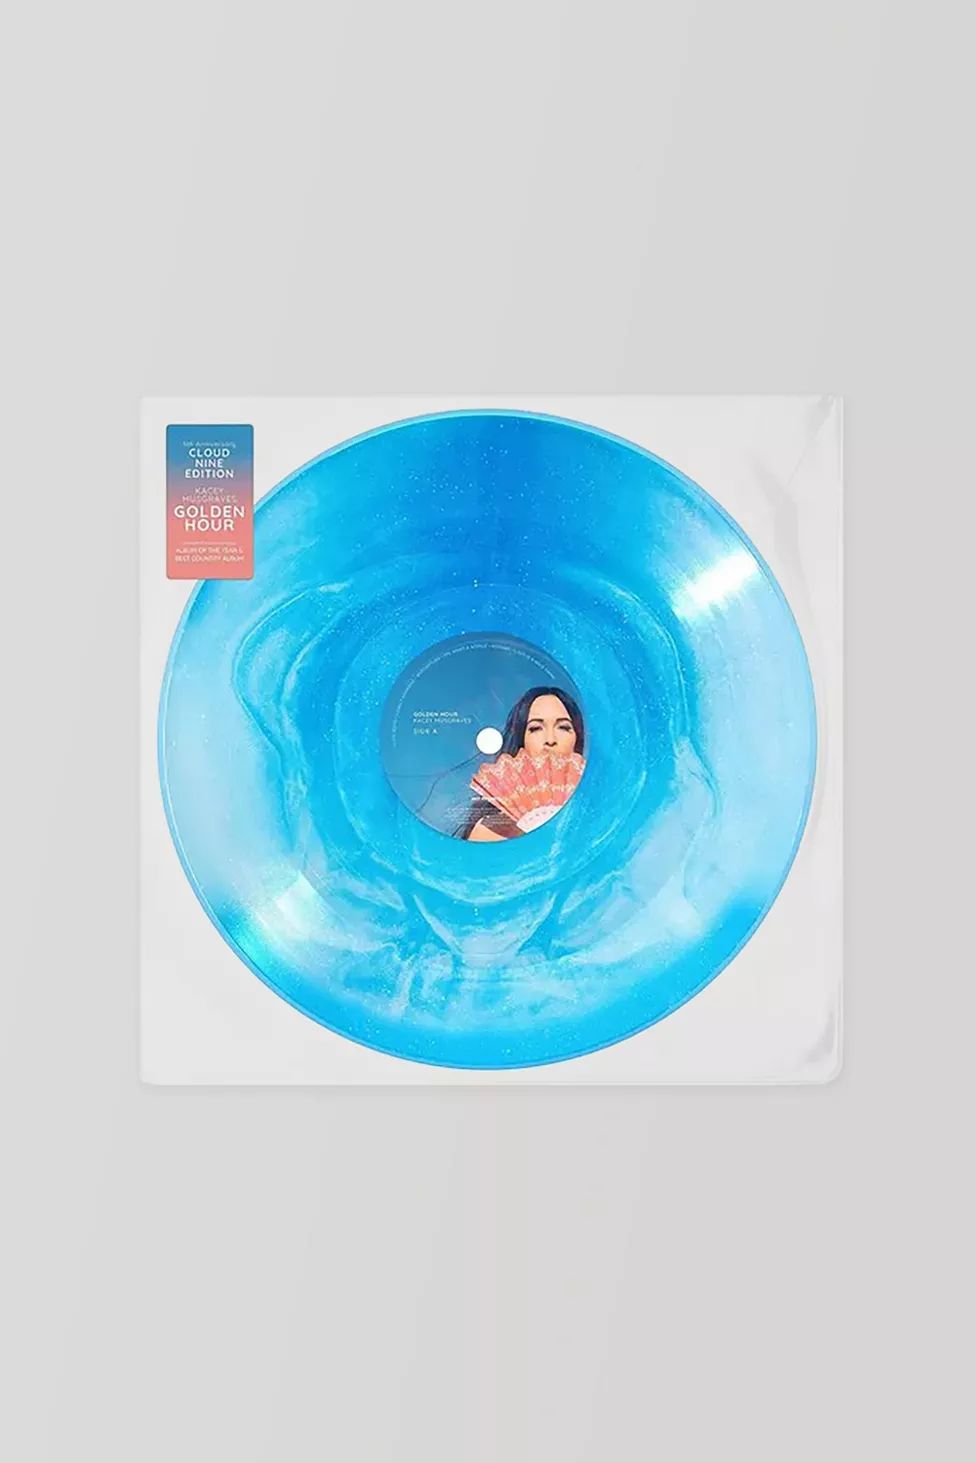 Kacey Musgraves - Golden Hour (5th Anniversary) LP | Urban Outfitters (US and RoW)